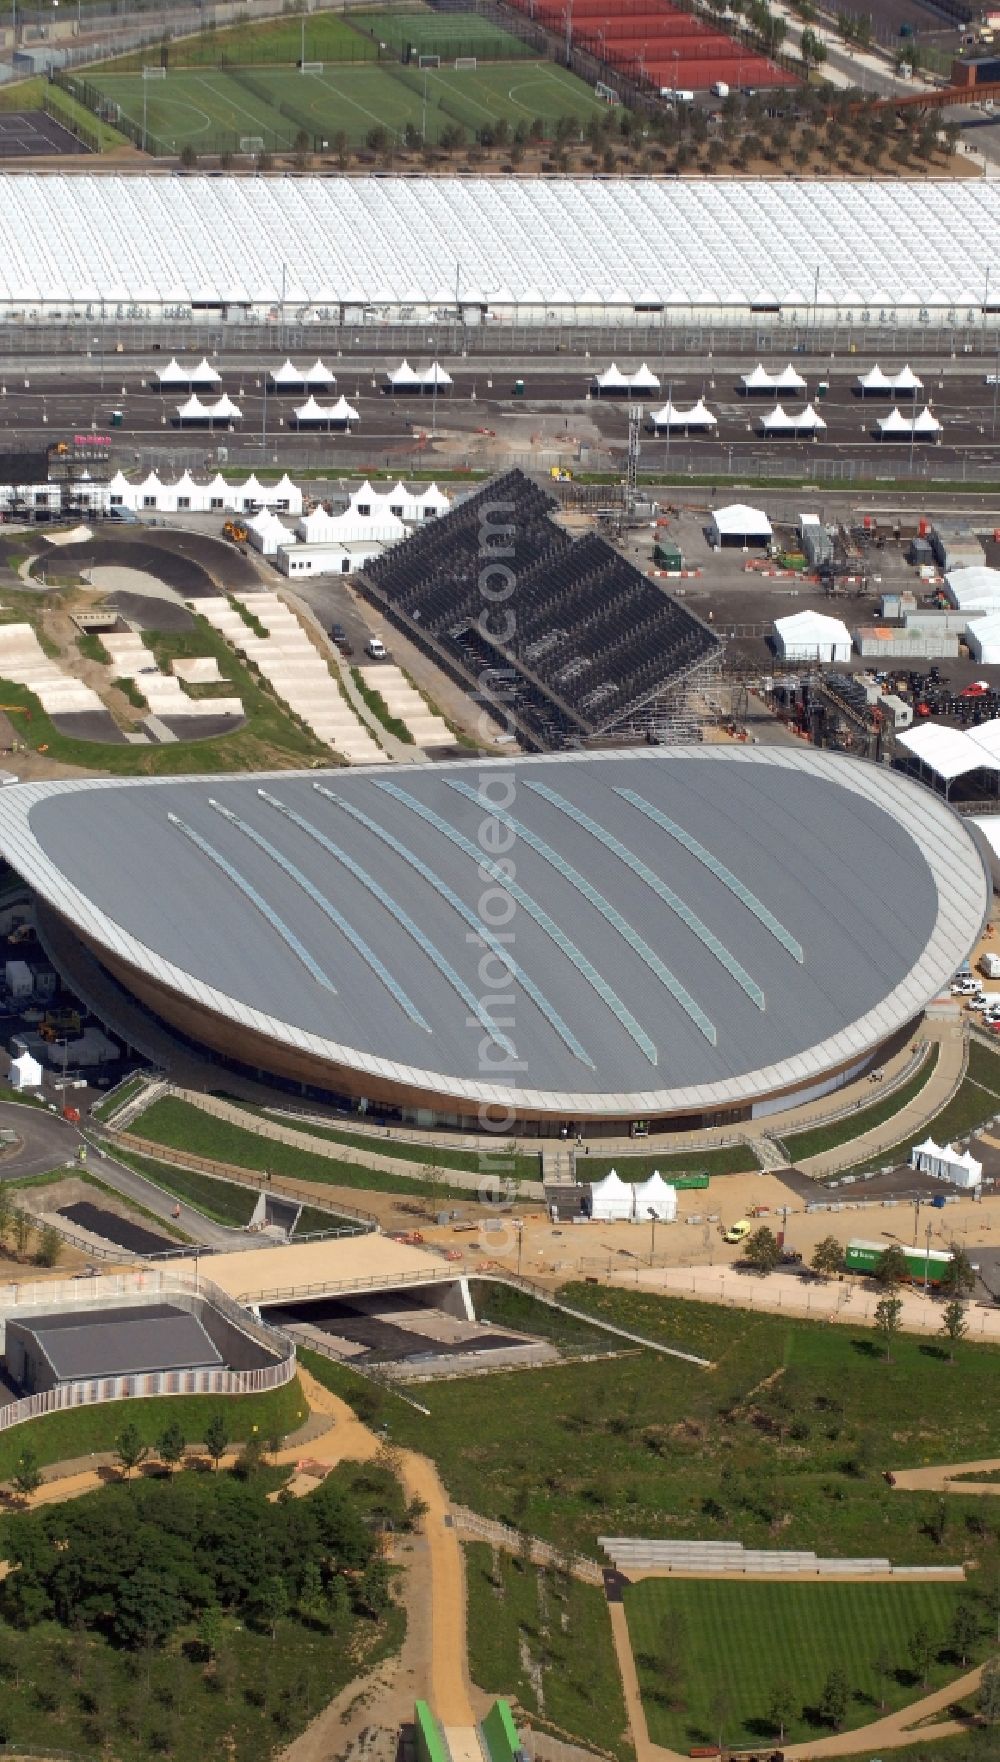 London from the bird's eye view: The London Velopark is a cycling centre in Leyton in east London. It is one of the permanent Olympic and Paralympic venues for the 2012 Games. The Velopark is at the northern end of Olympic Park. It has a velodrome and BMX racing track, which will be used for the Games in Great Britain